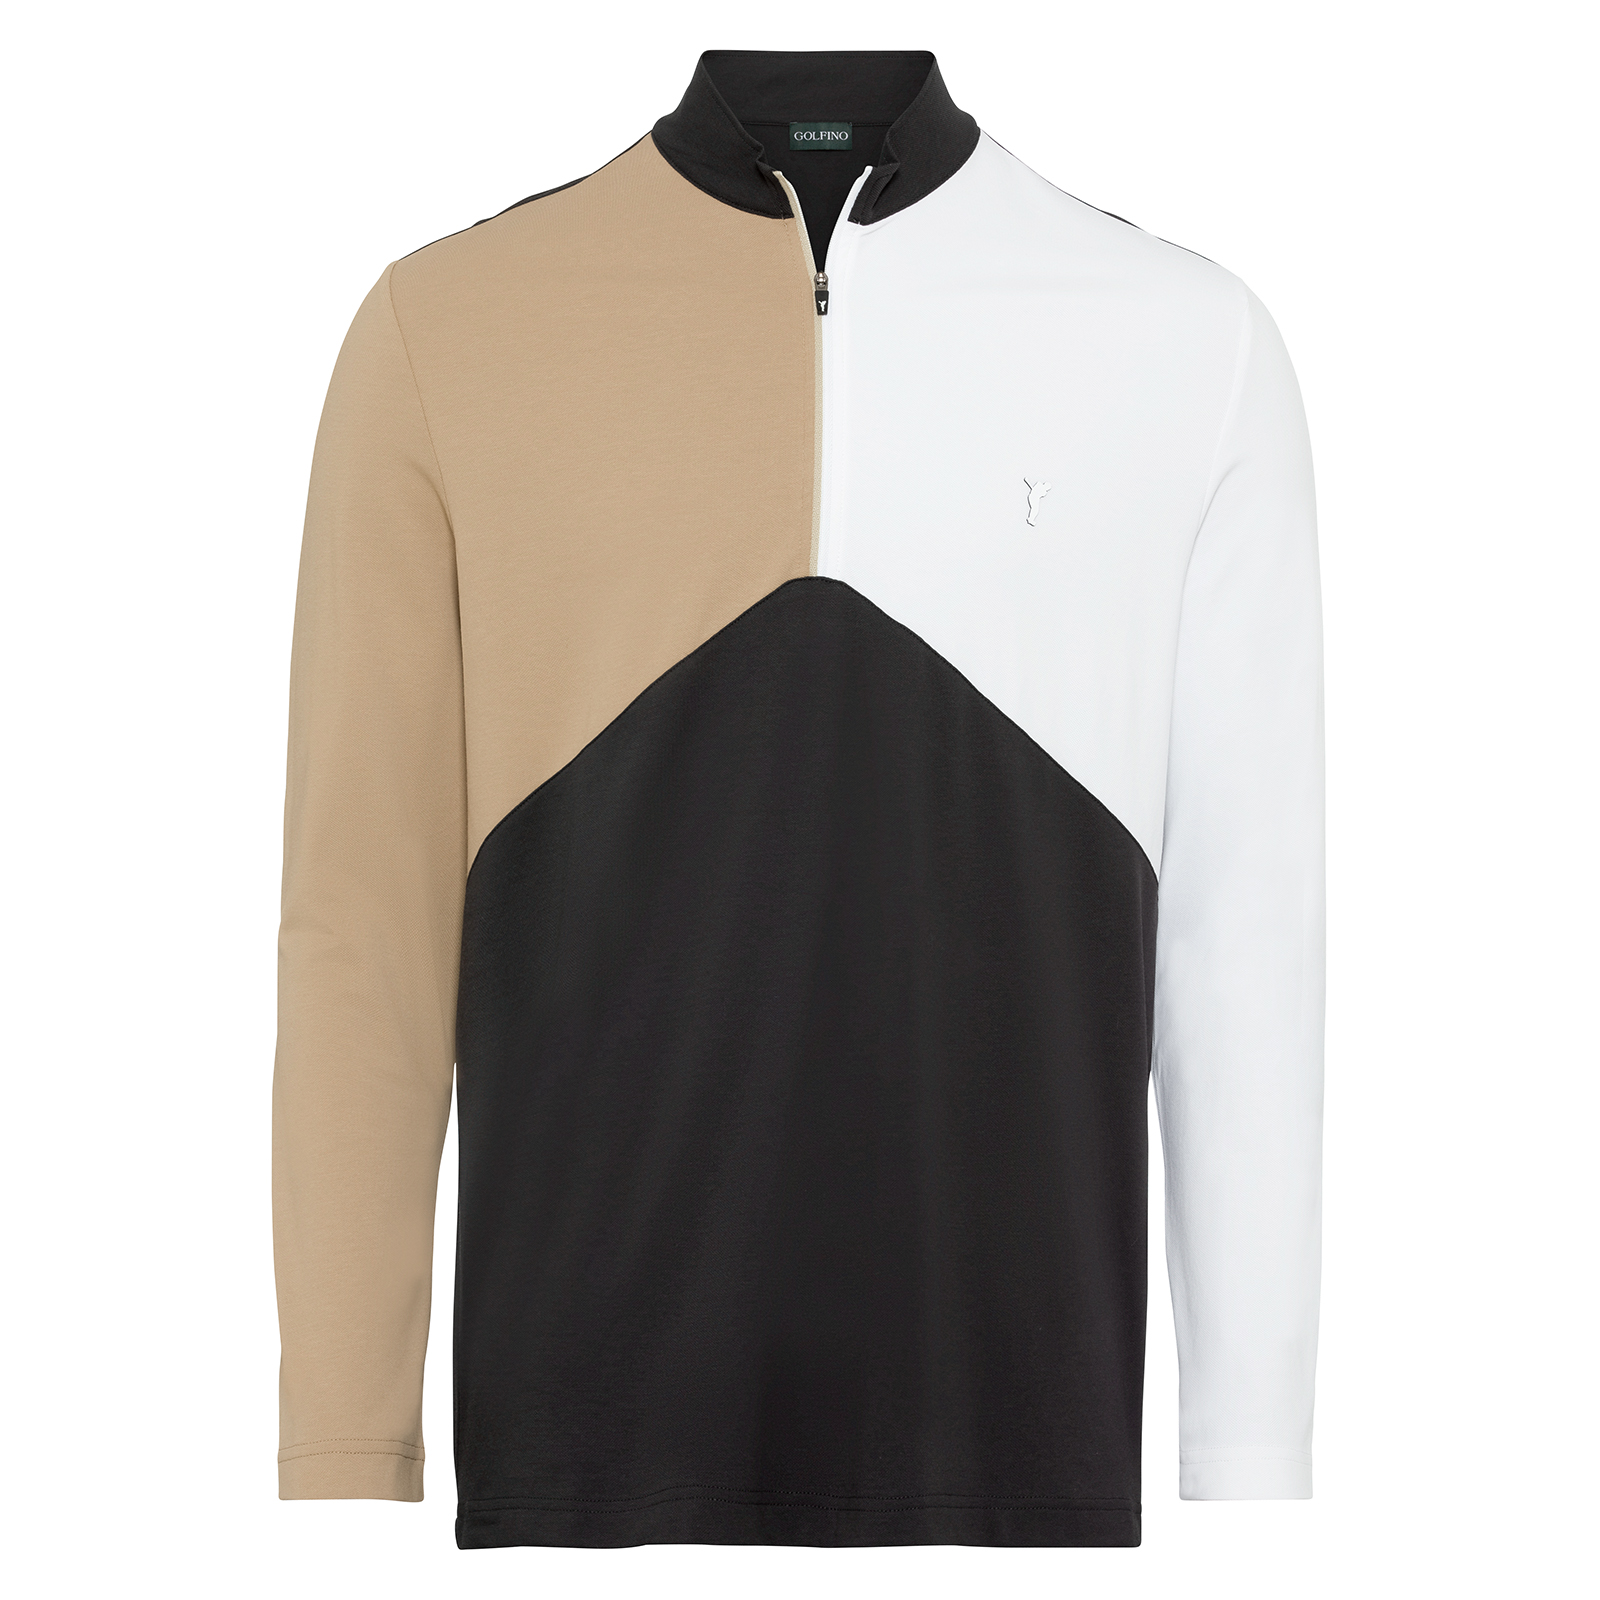 Men’s half-zip golf sweater in colour blocking design with sun protection 